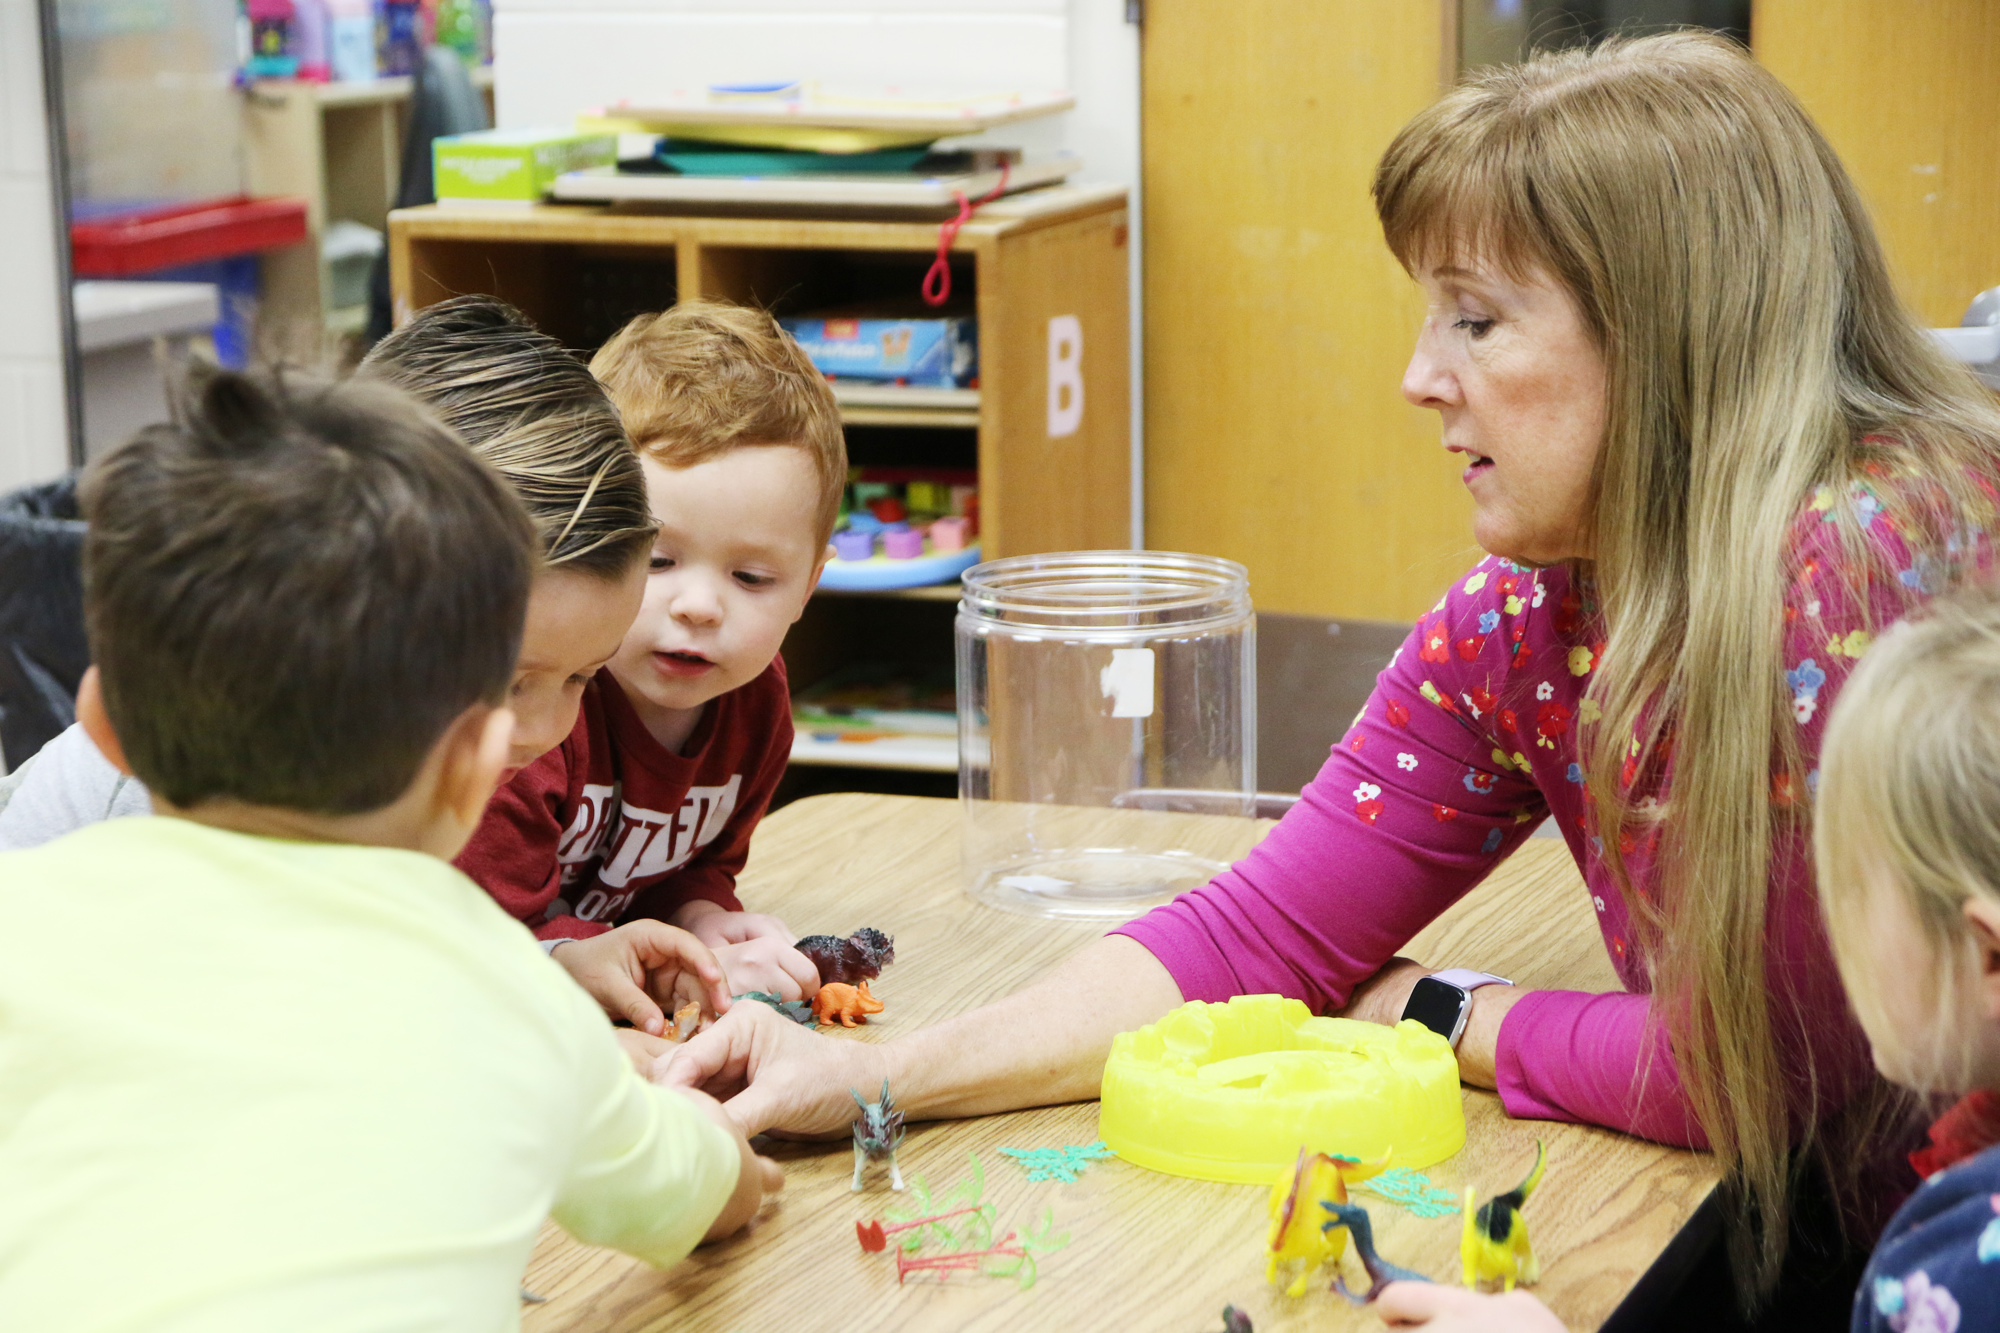 Joan Wheeler teaches a blended preschool class, where her students are a mix of children with and without disabilities. Photo by Jarleene Almenas